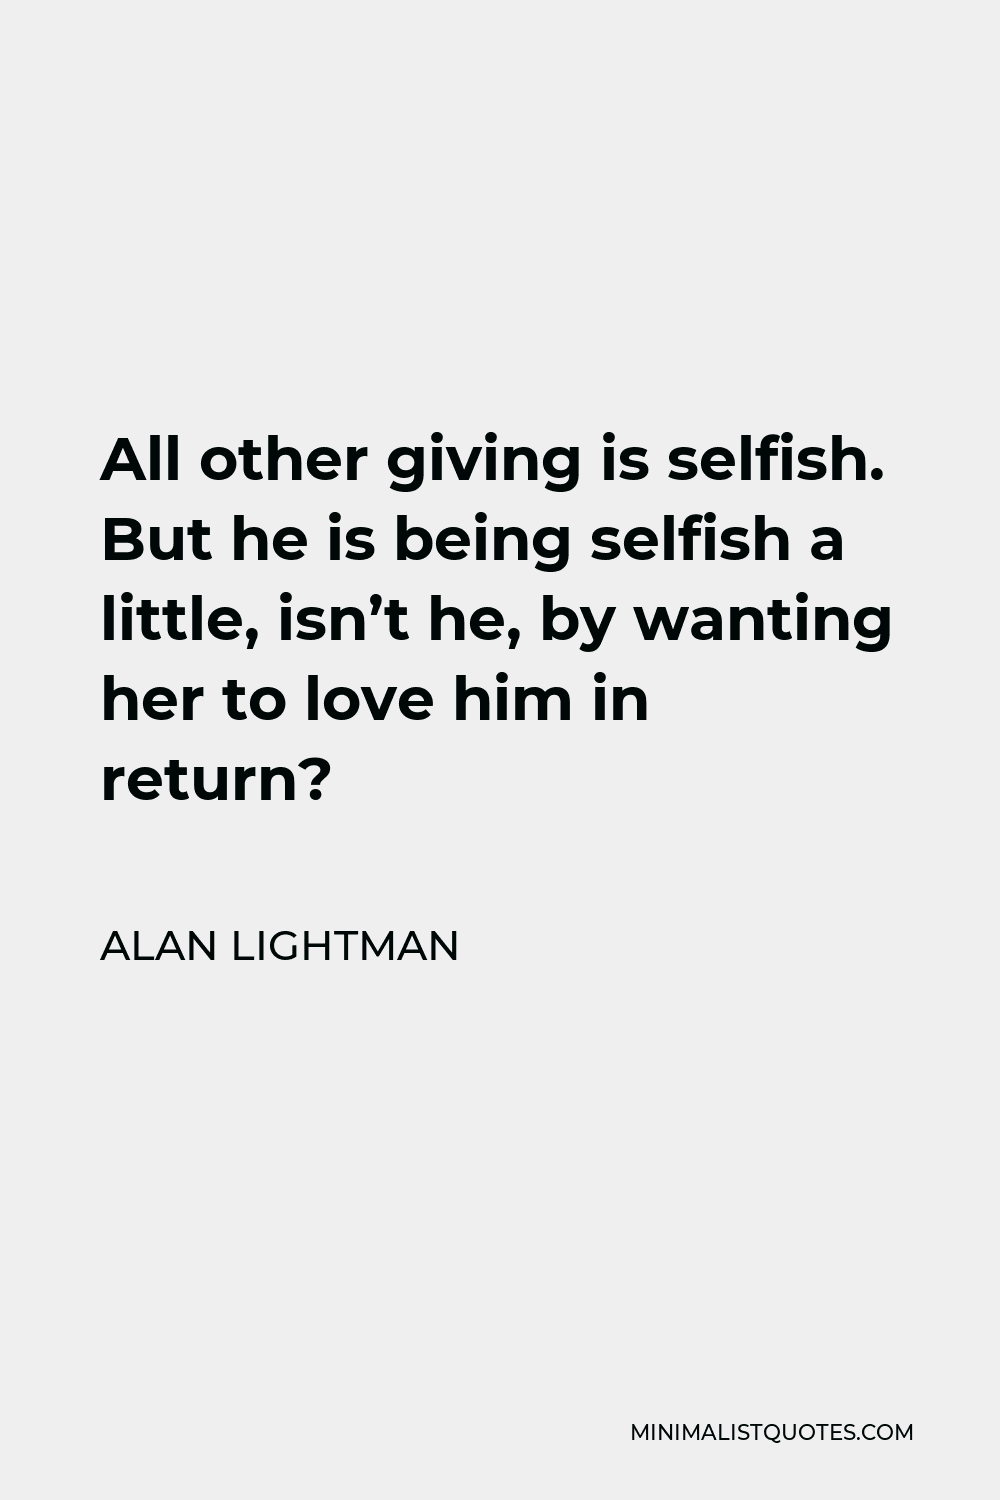 Alan Lightman Quote - All other giving is selfish. But he is being selfish a little, isn’t he, by wanting her to love him in return?